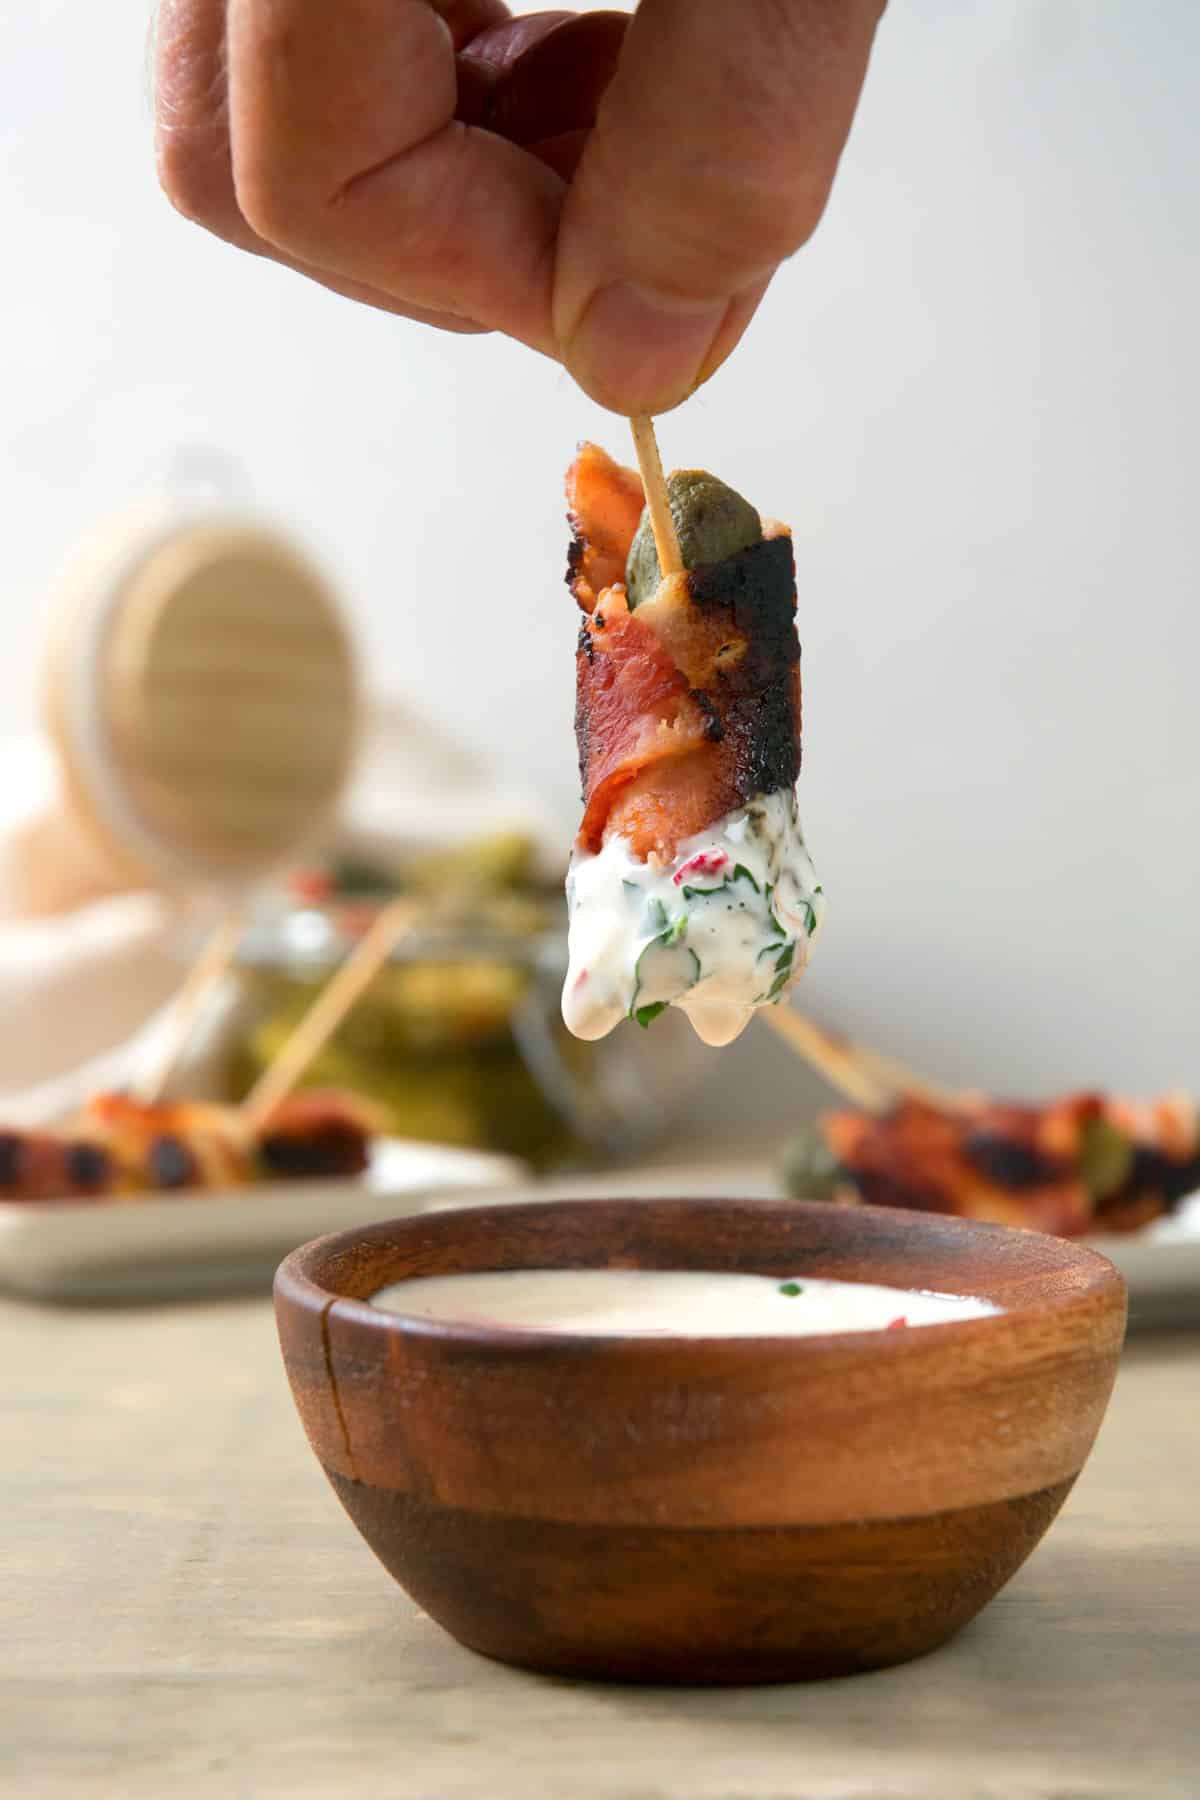 A grilled bacon wrapped pickle on a toothpick held by a hand over top of dipping sauce in a wooden bowl.